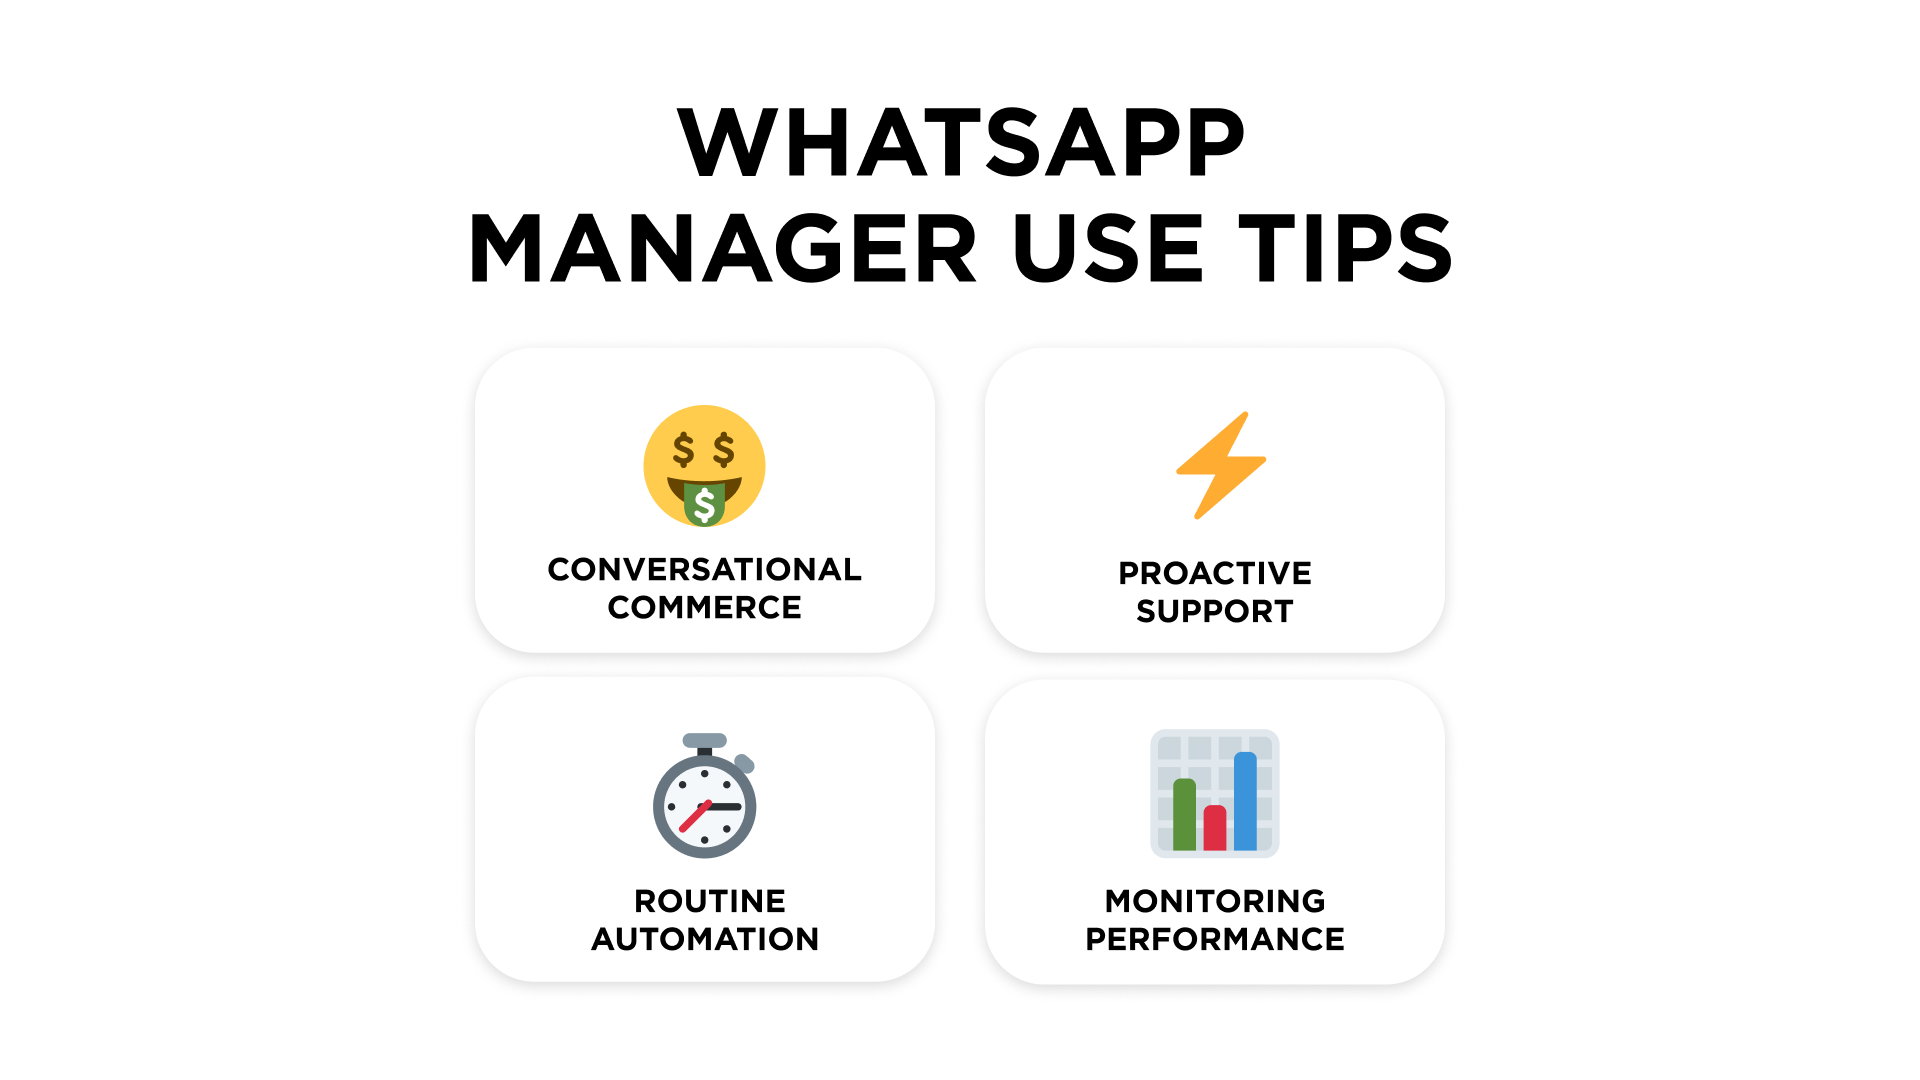 How to use WhatsApp Manager